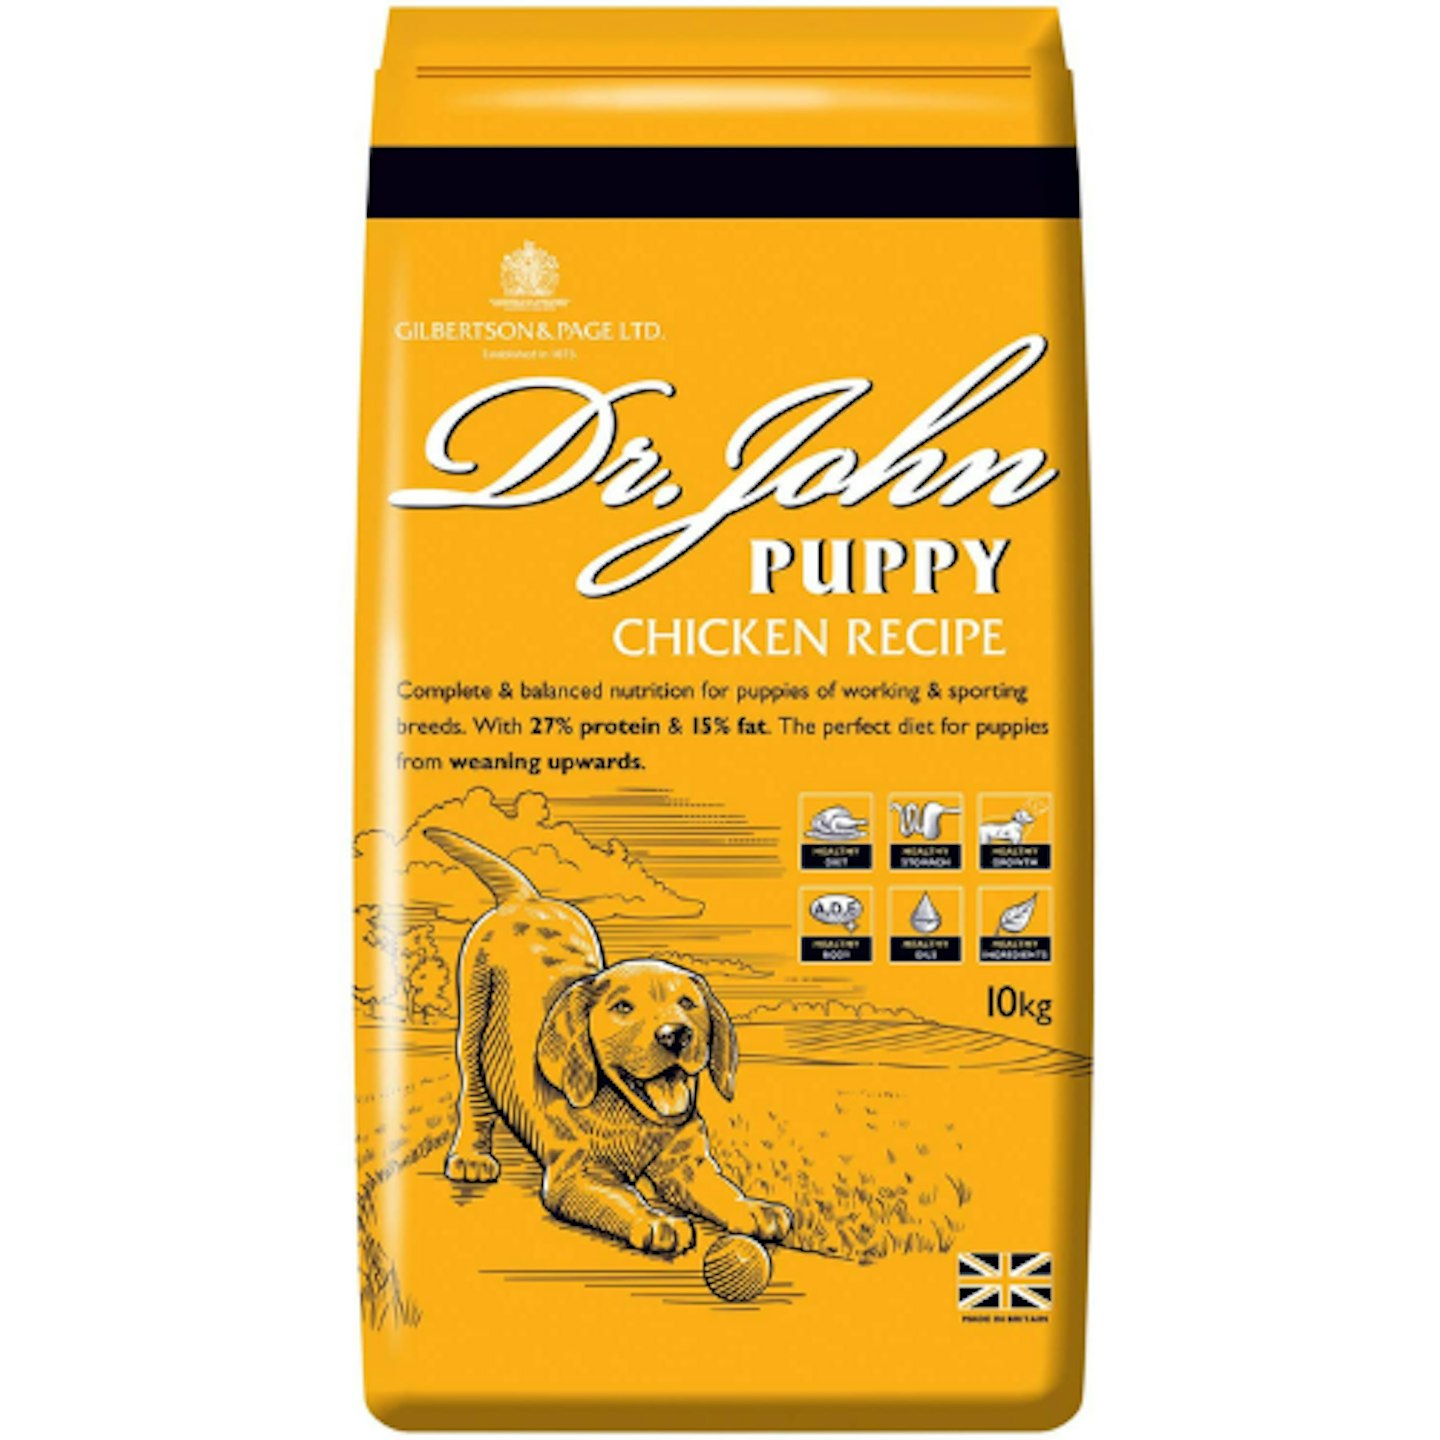 Gilbertson & Page Dr. John Puppy Chicken Recipe Dry Dog Food